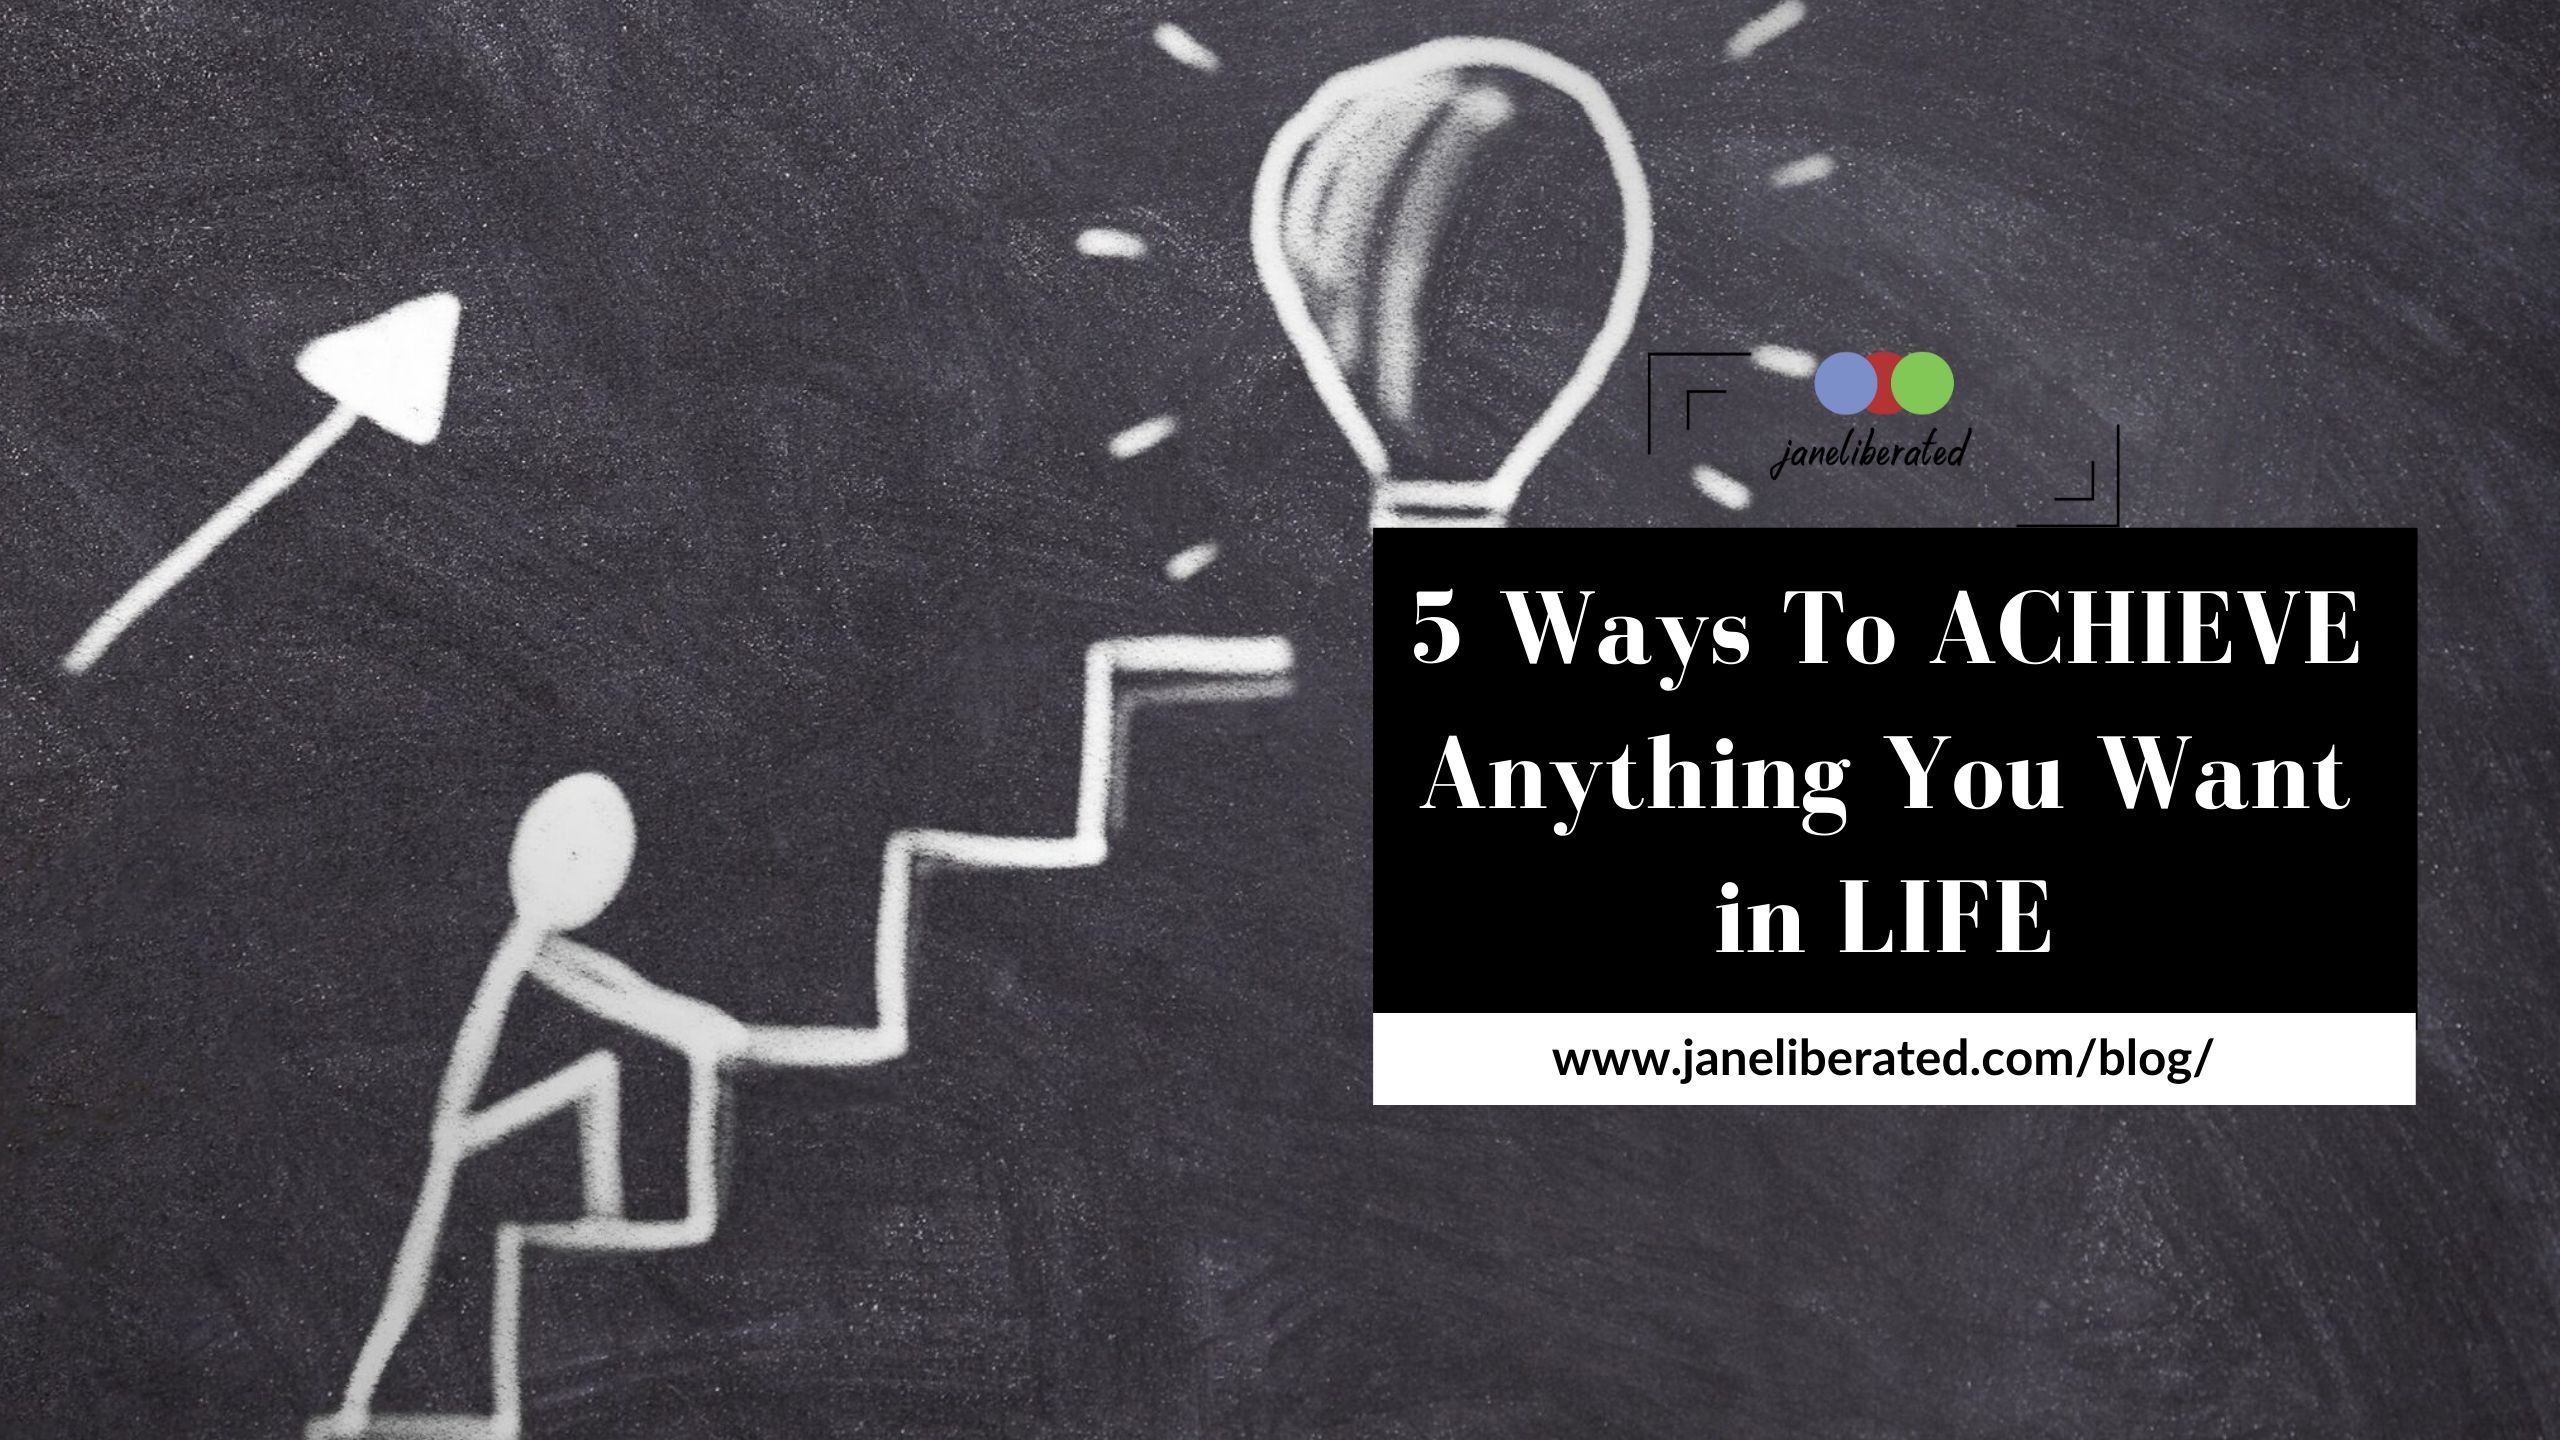 5 Ways to achieve anything you want in life